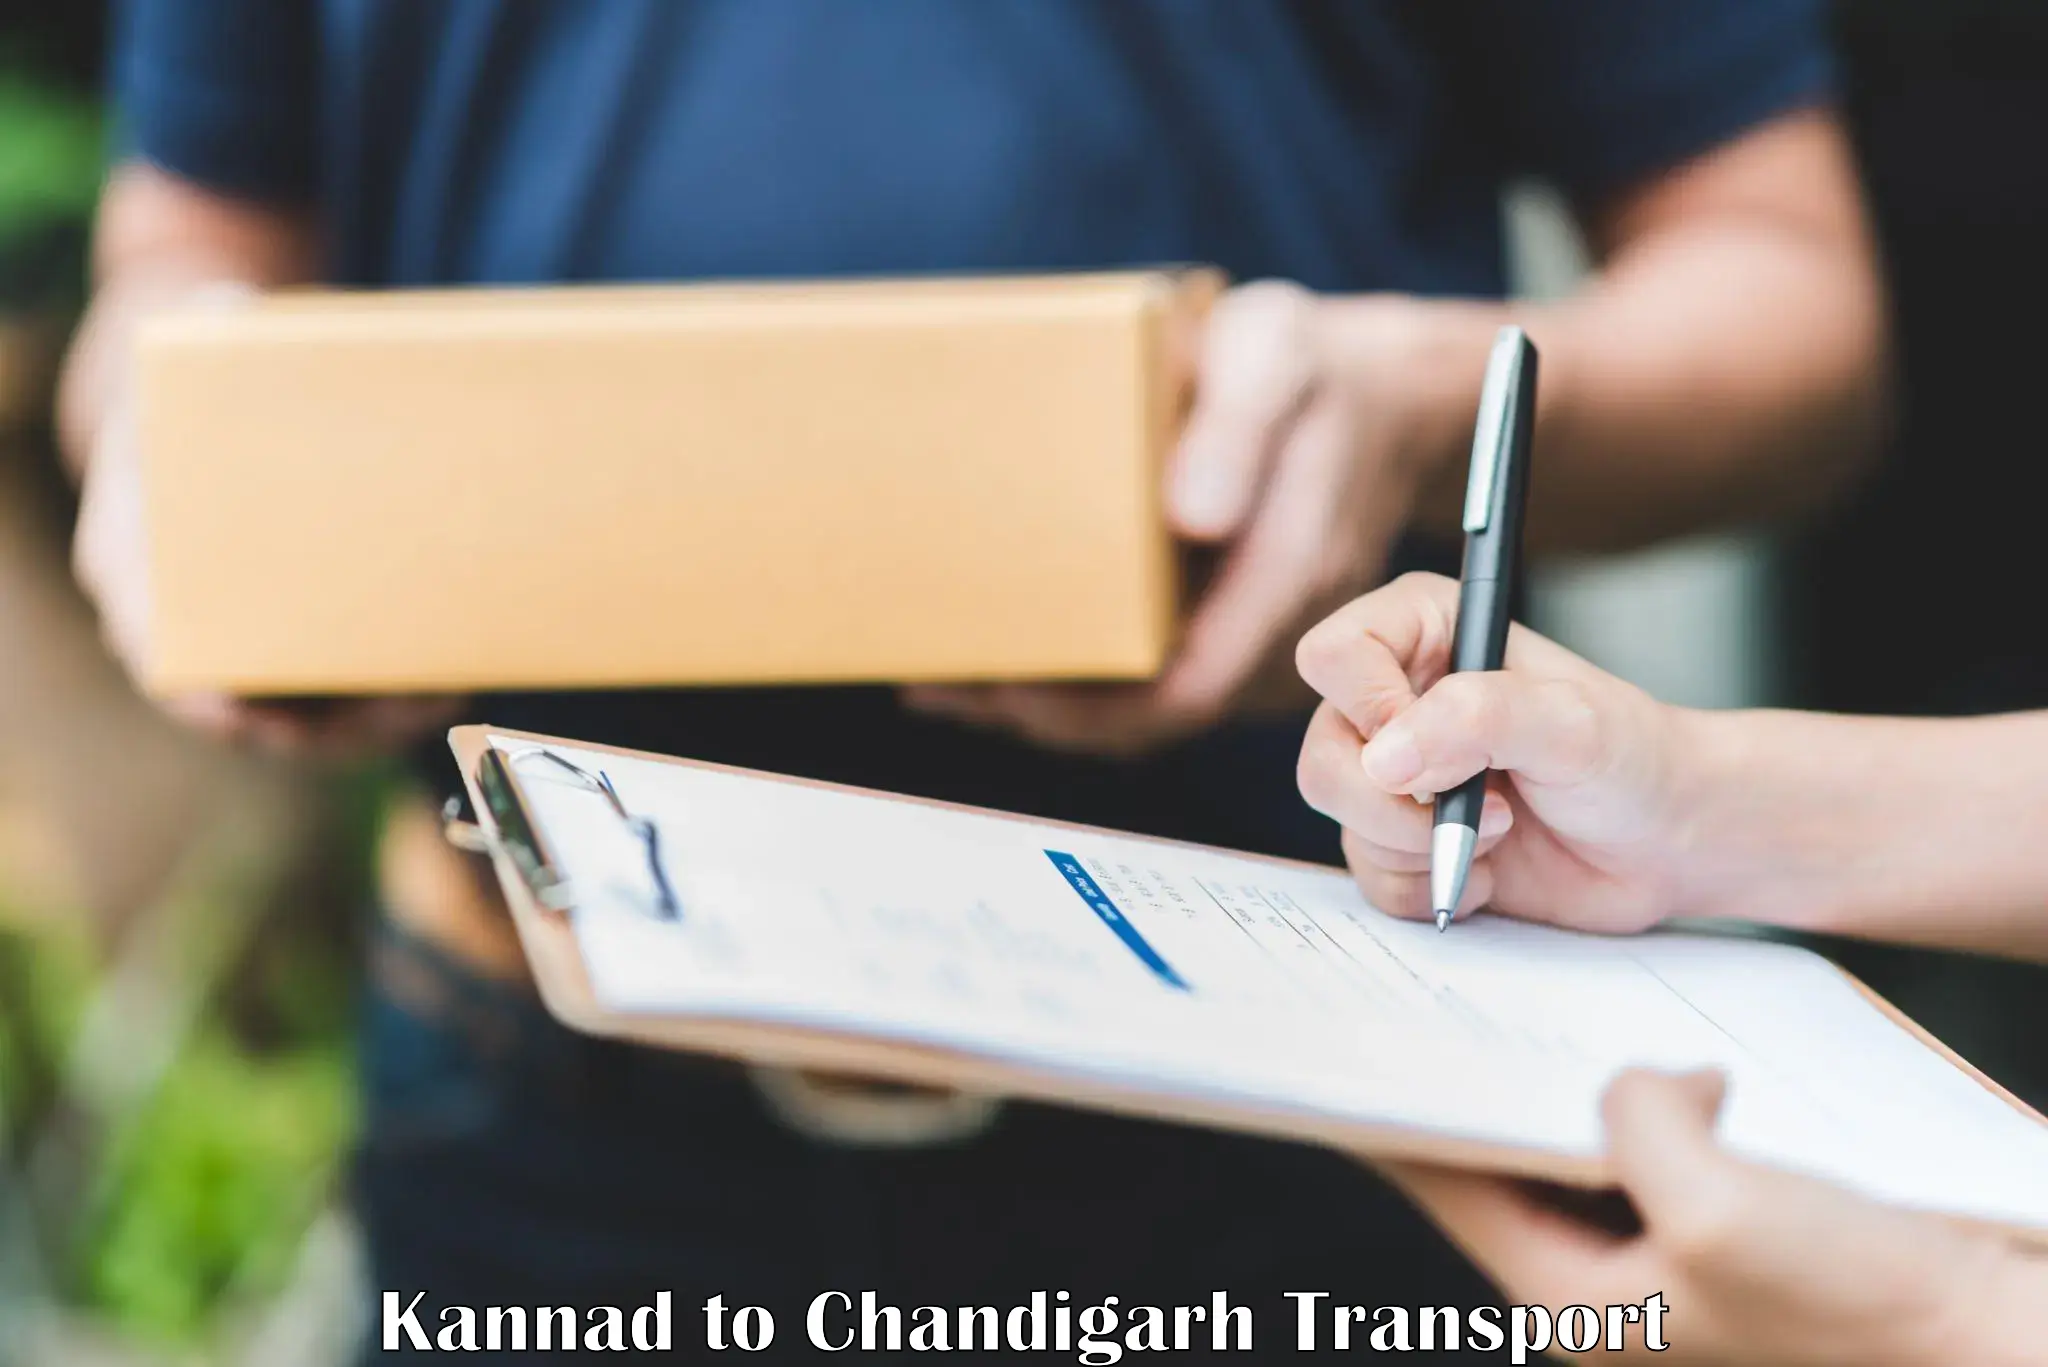 Delivery service Kannad to Chandigarh